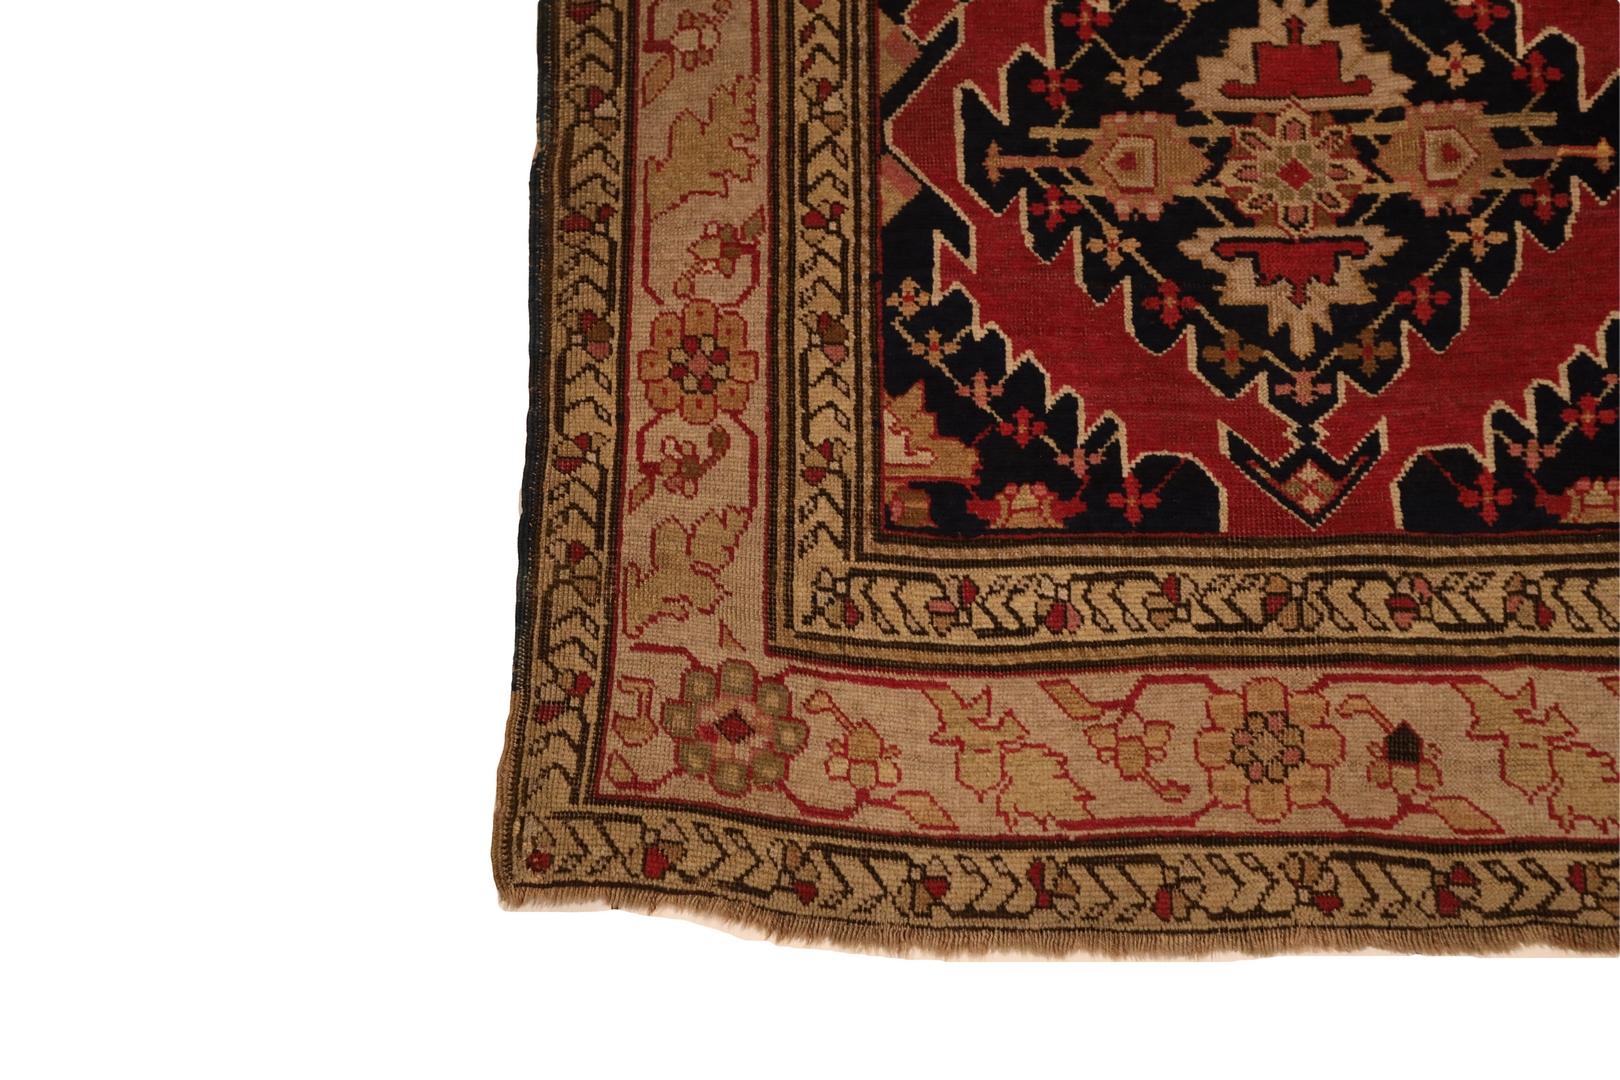 Step into the world of timeless beauty and charm with our Karabagh Runner. This exquisite rug is a testament to the artistry and craftsmanship that has made Karabagh rugs renowned throughout the ages.

At the heart of this runner, a captivating